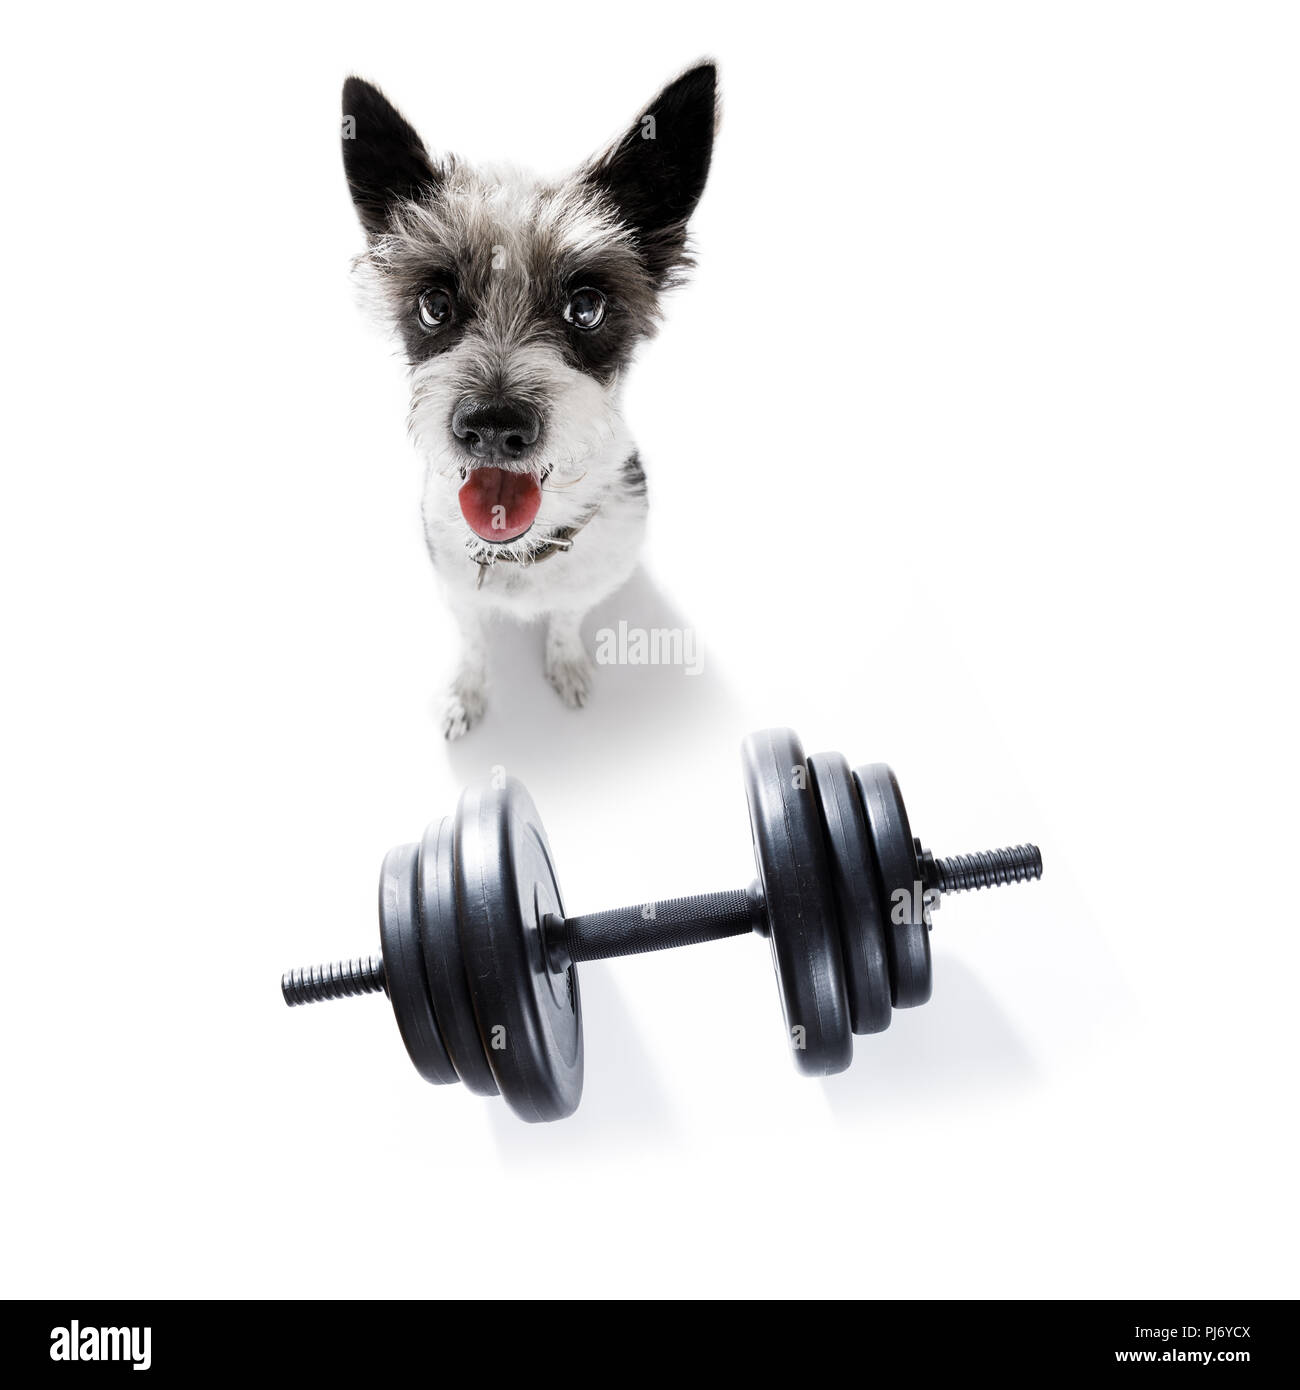 https://c8.alamy.com/comp/PJ6YCX/poodle-dog-with-guilty-conscience-for-overweight-and-to-loose-weight-on-white-background-with-a-dumbbell-PJ6YCX.jpg